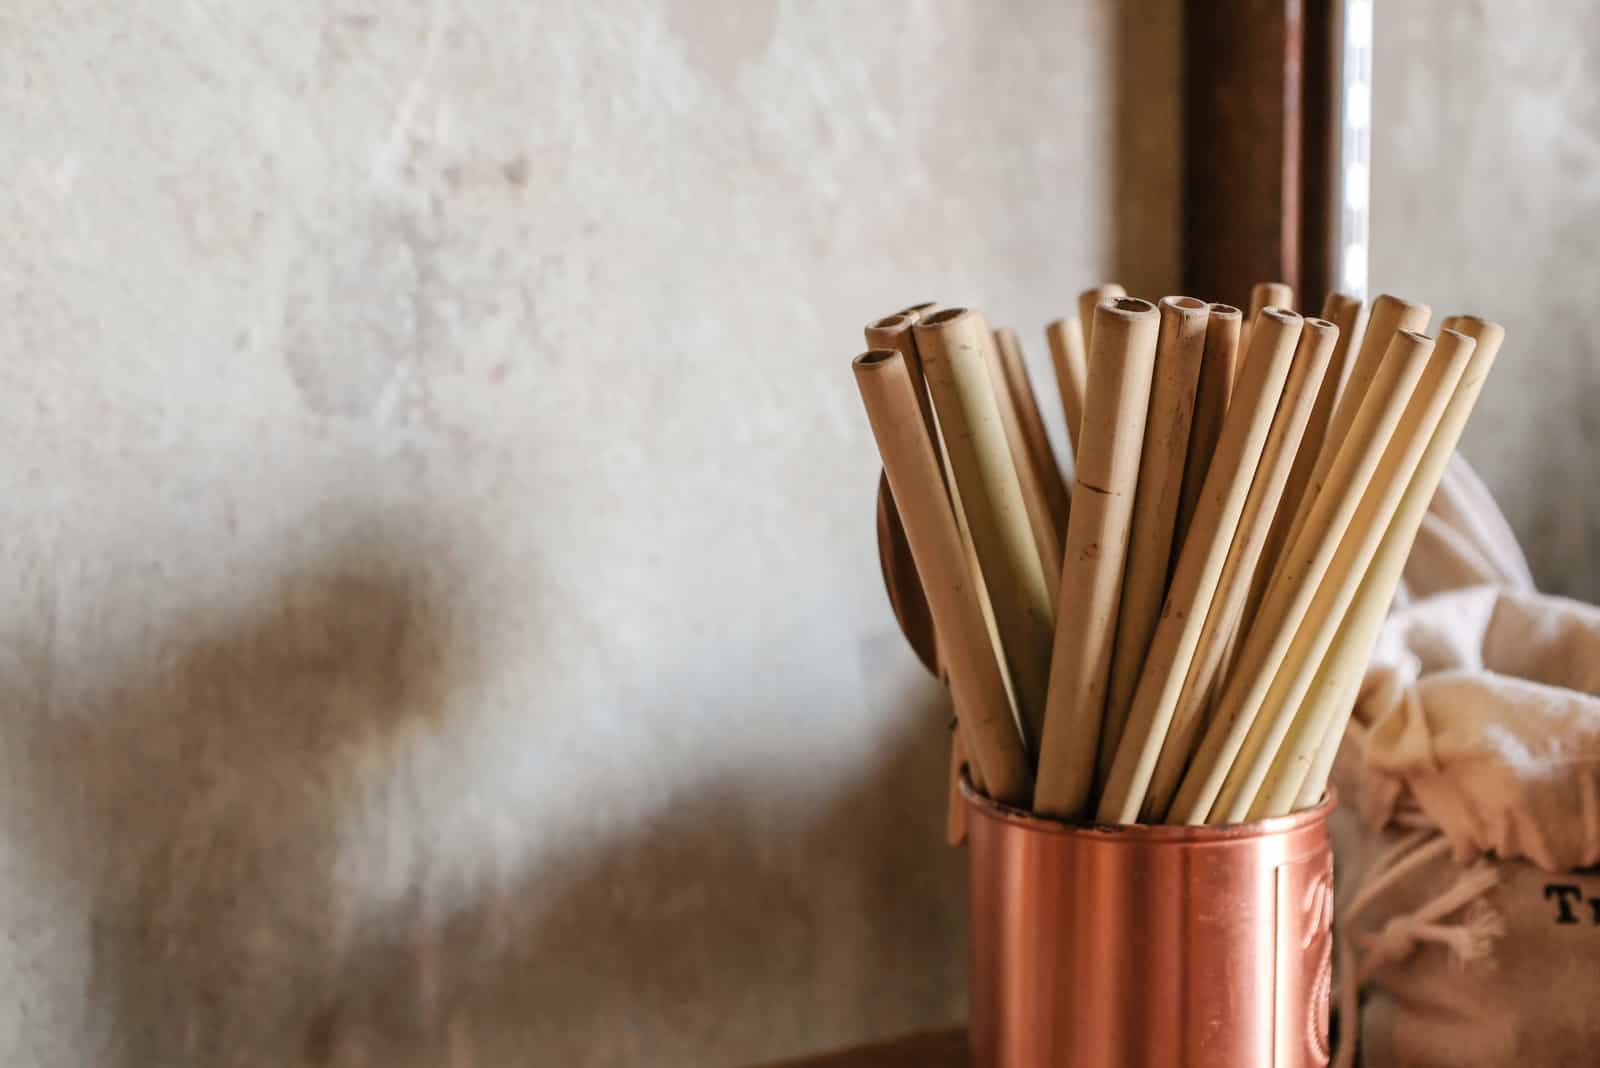 bamboo straws in a rose gold pot